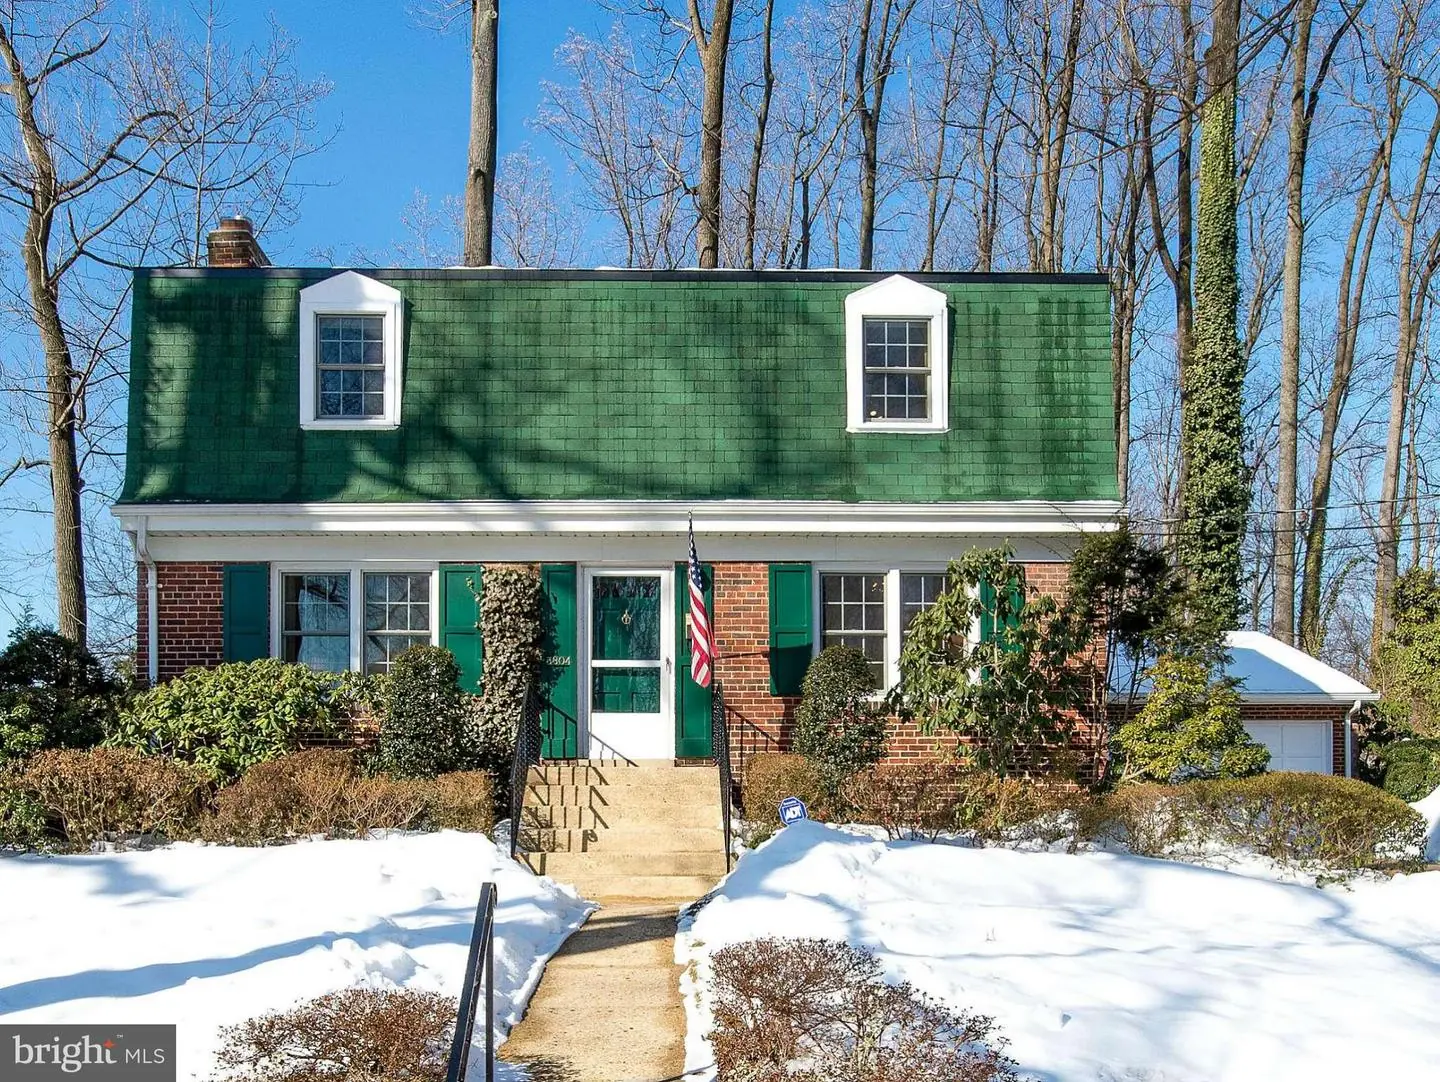 1002853862-300795237719-2021-09-07-11-45-05  |   | Falls Church Delaware Real Estate For Sale | MLS# 1002853862  - Best of Northern Virginia